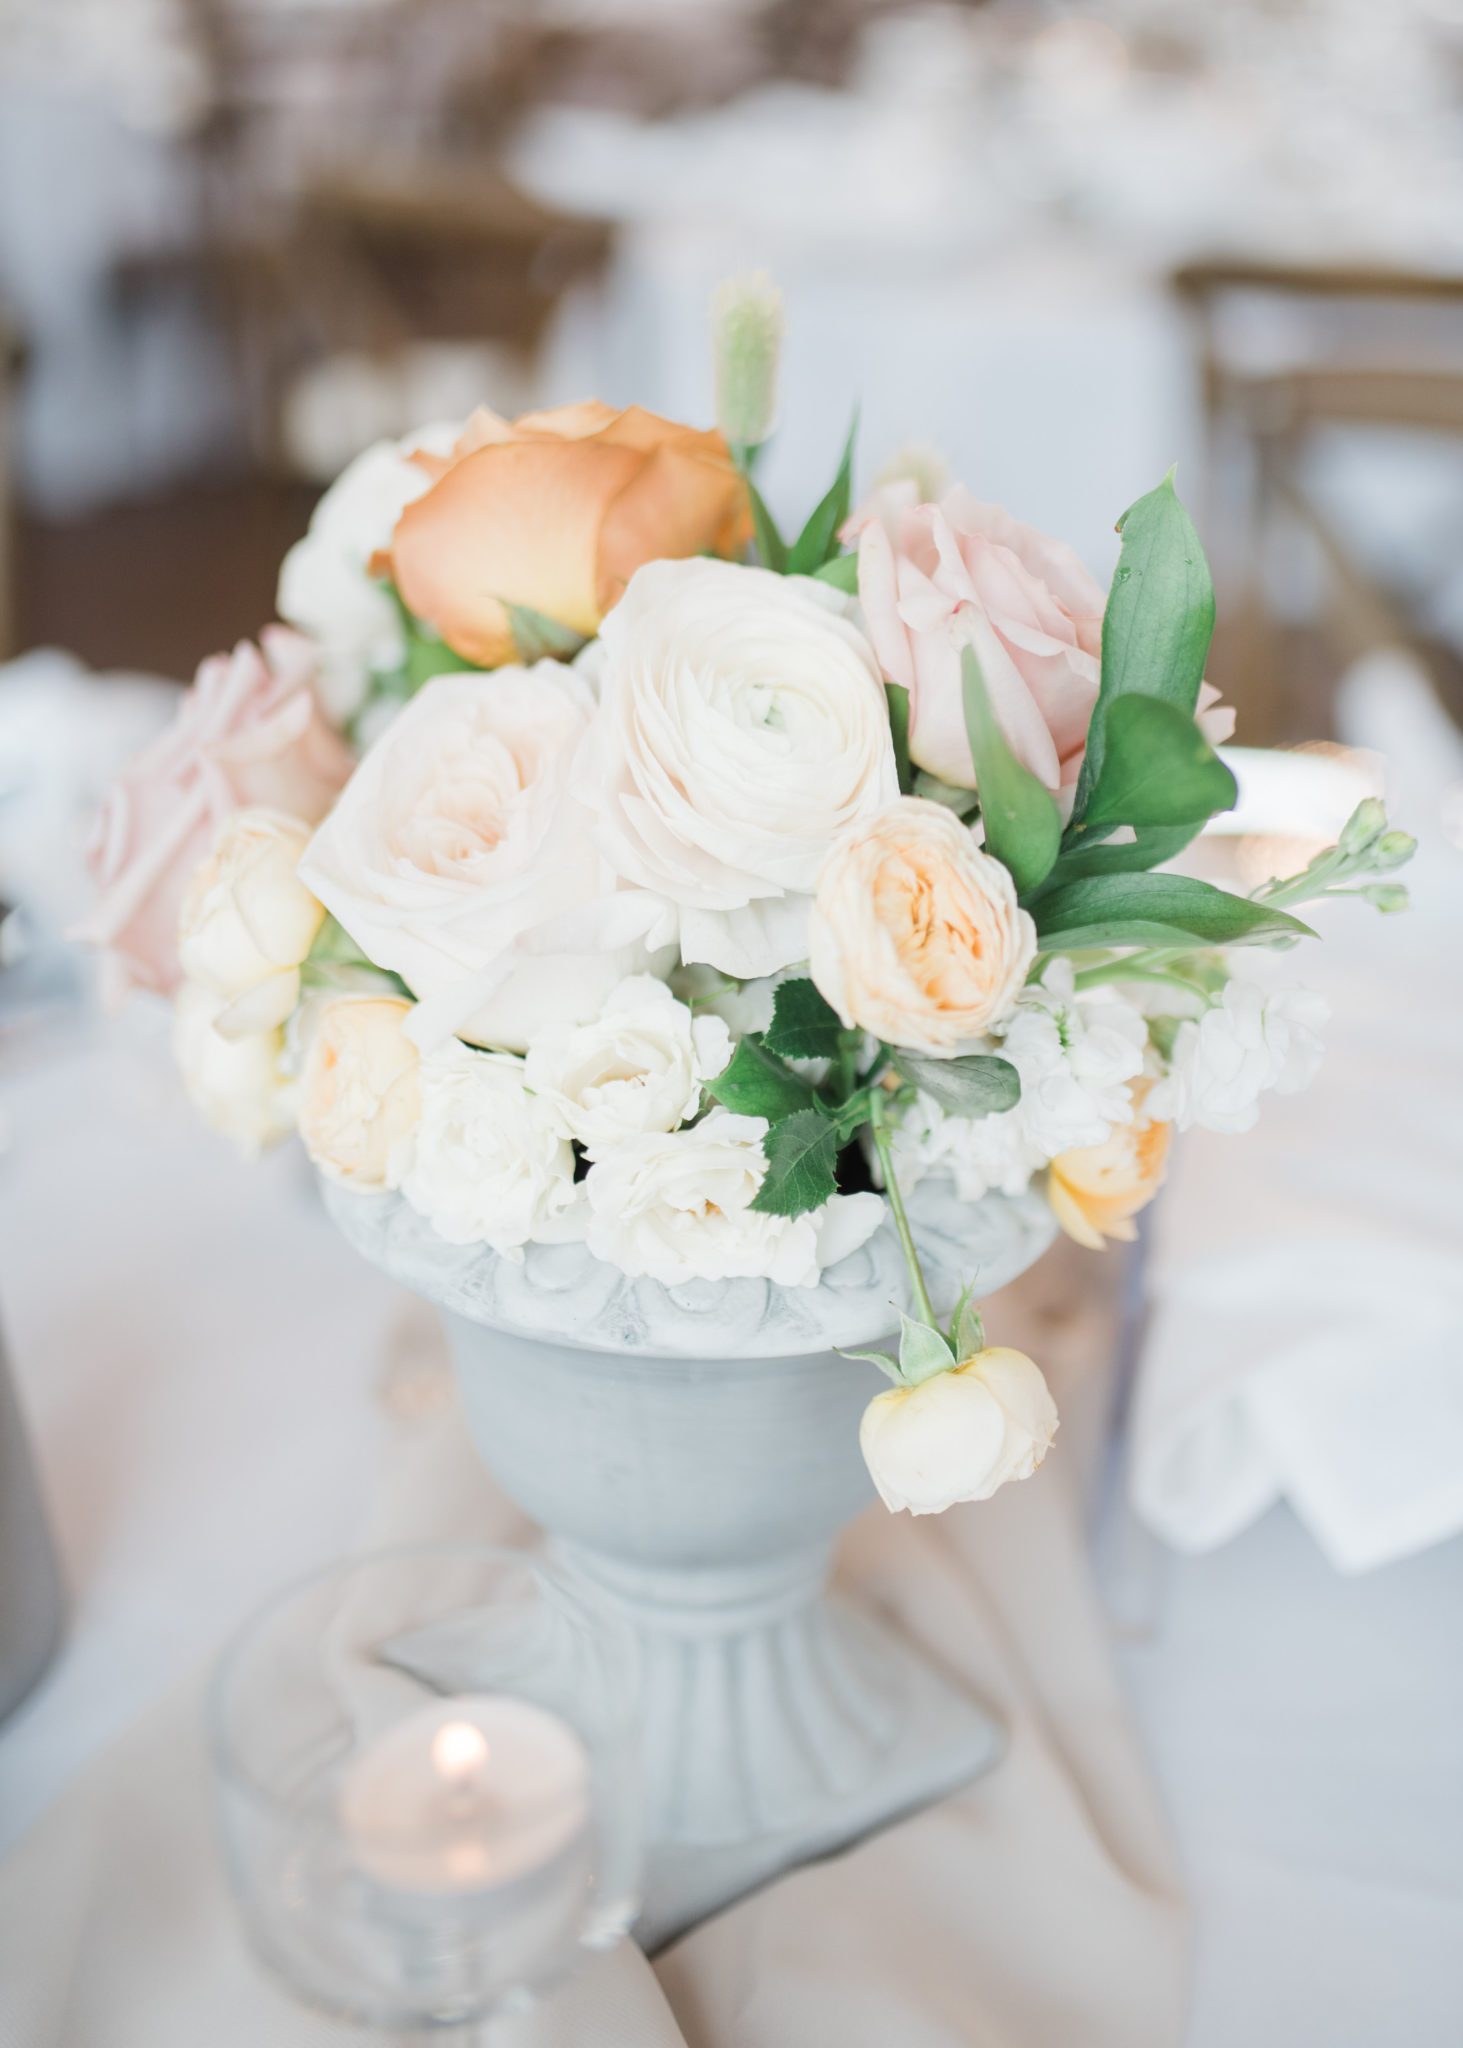 Peach, cream and white wedding florals for your wedding reception